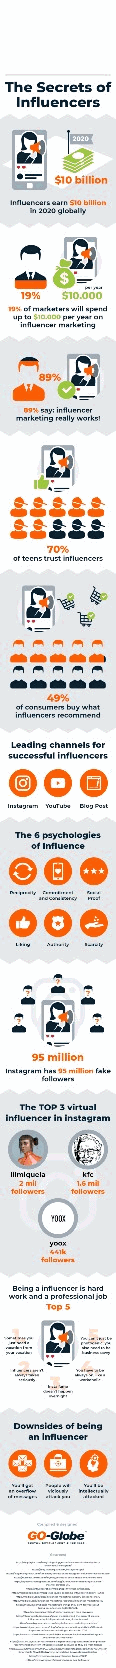 The secrets of influencers [Infographic]